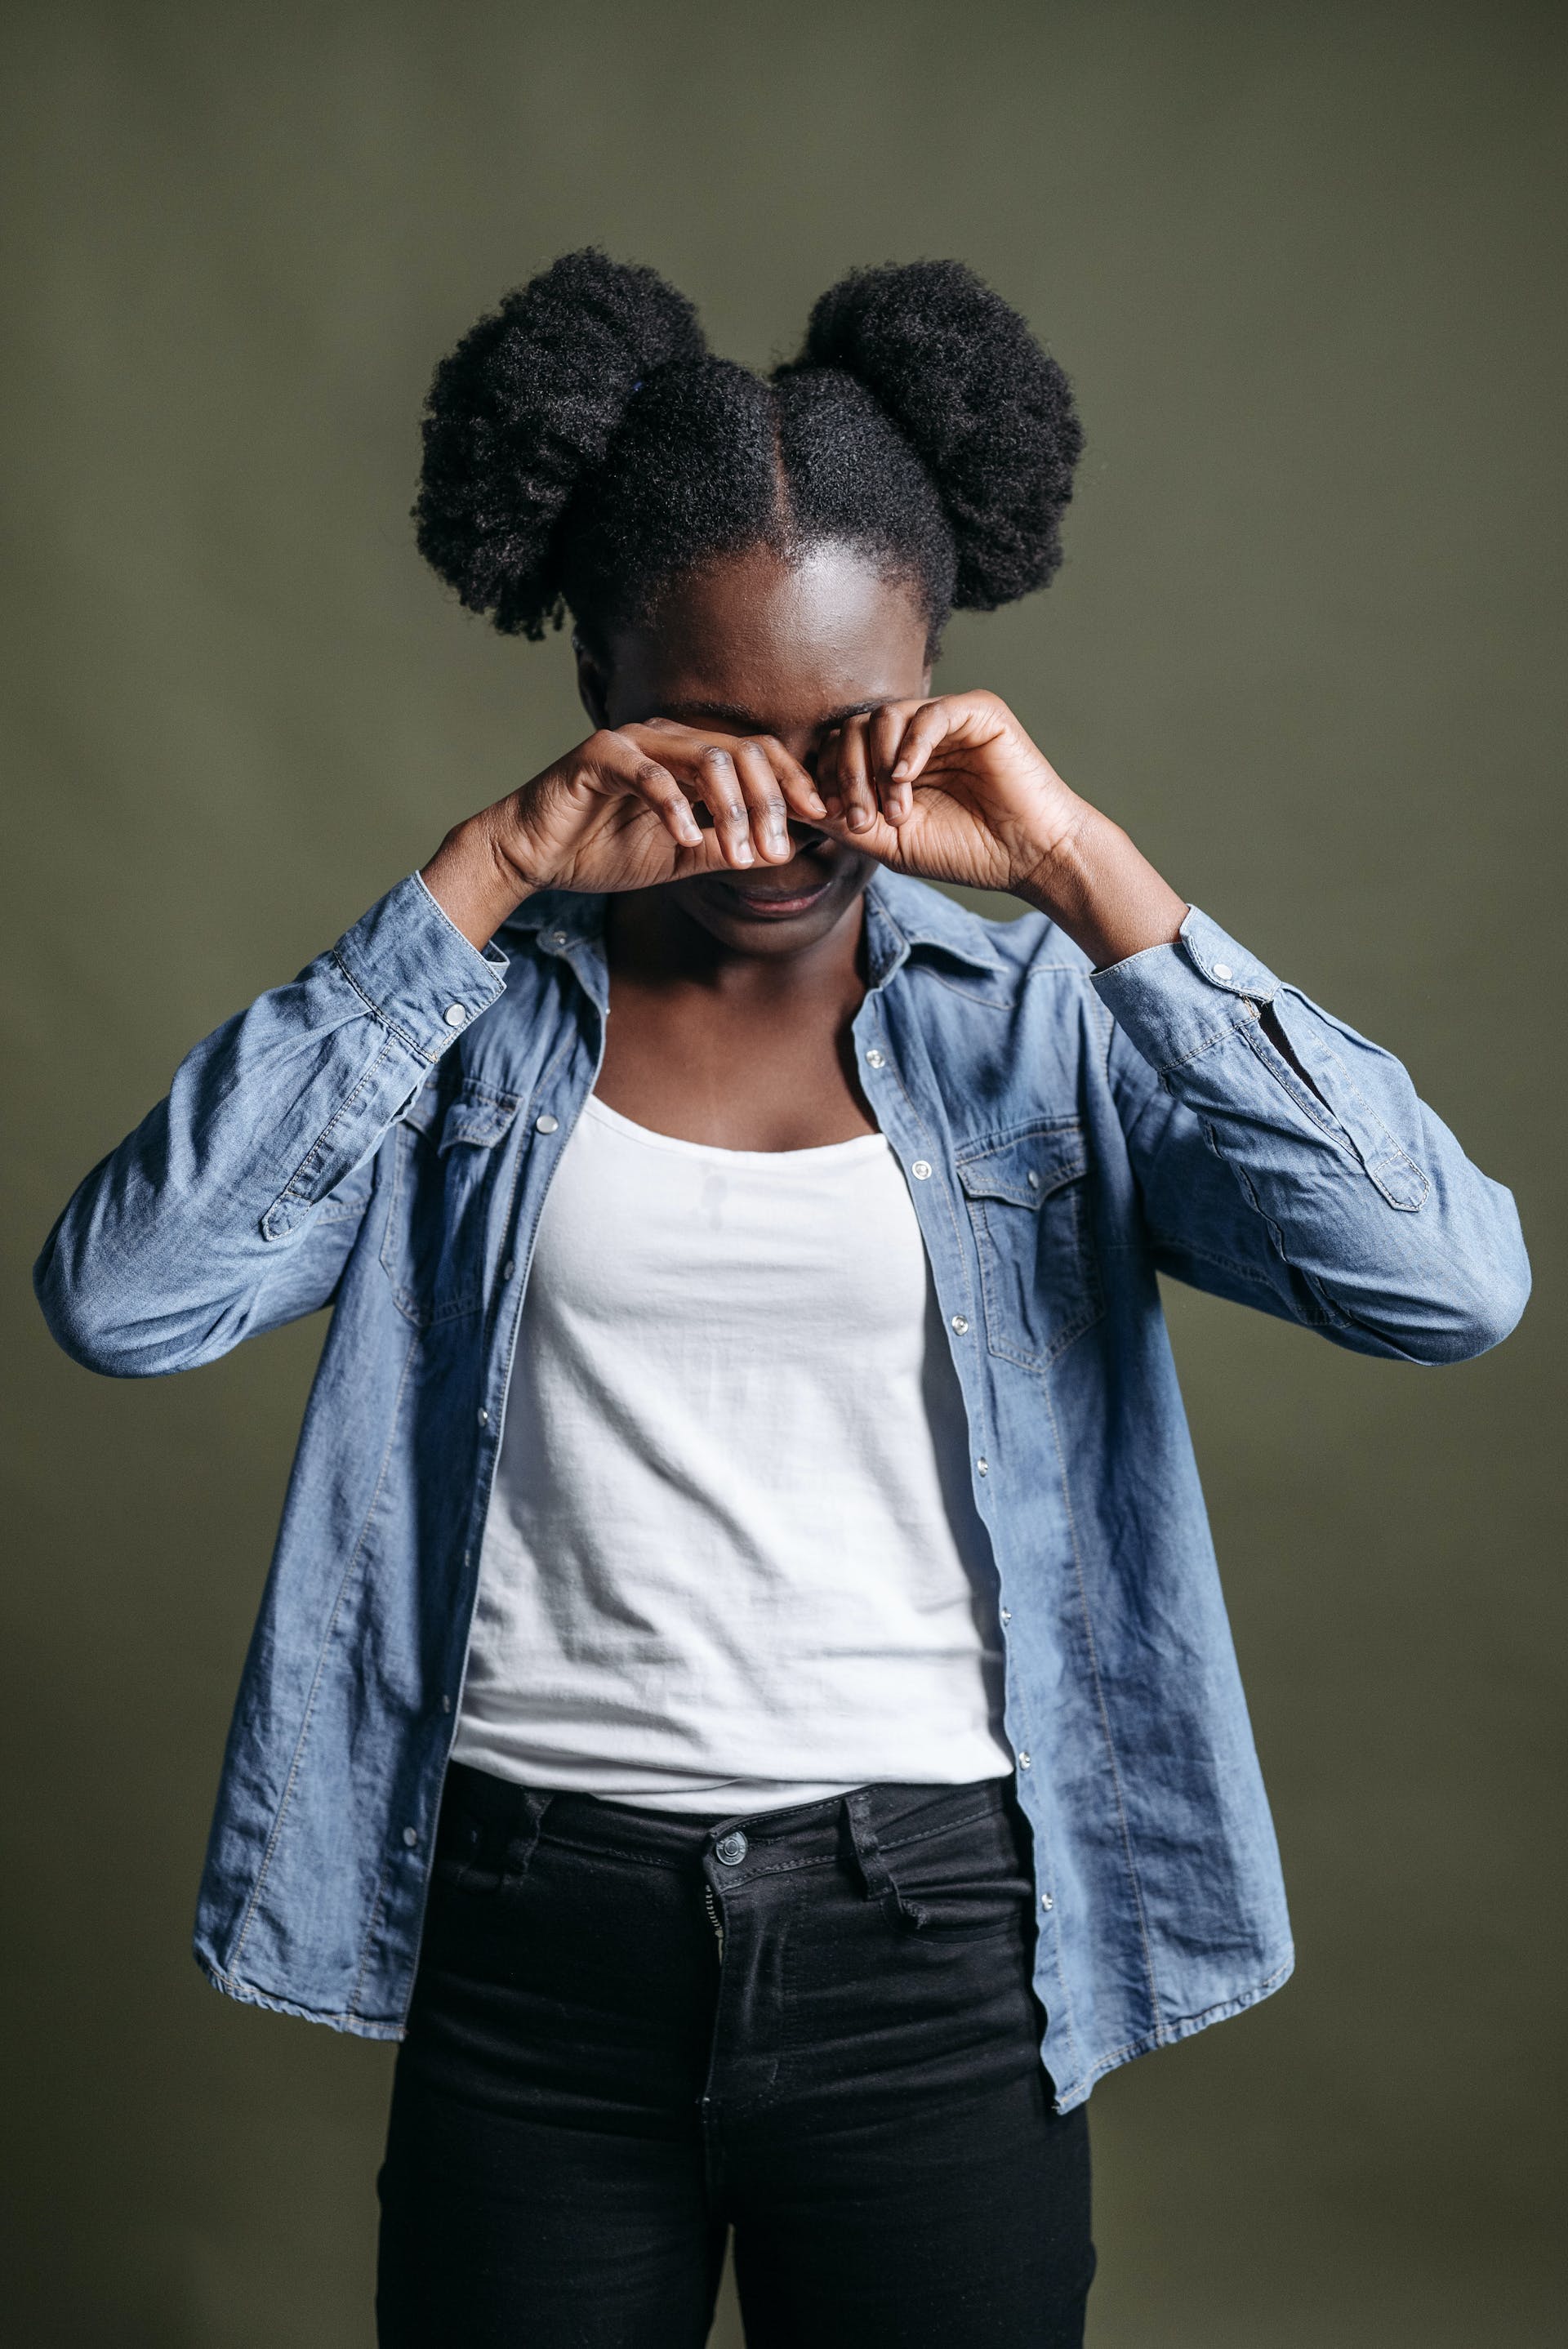 A black woman crying | Source: Pexels